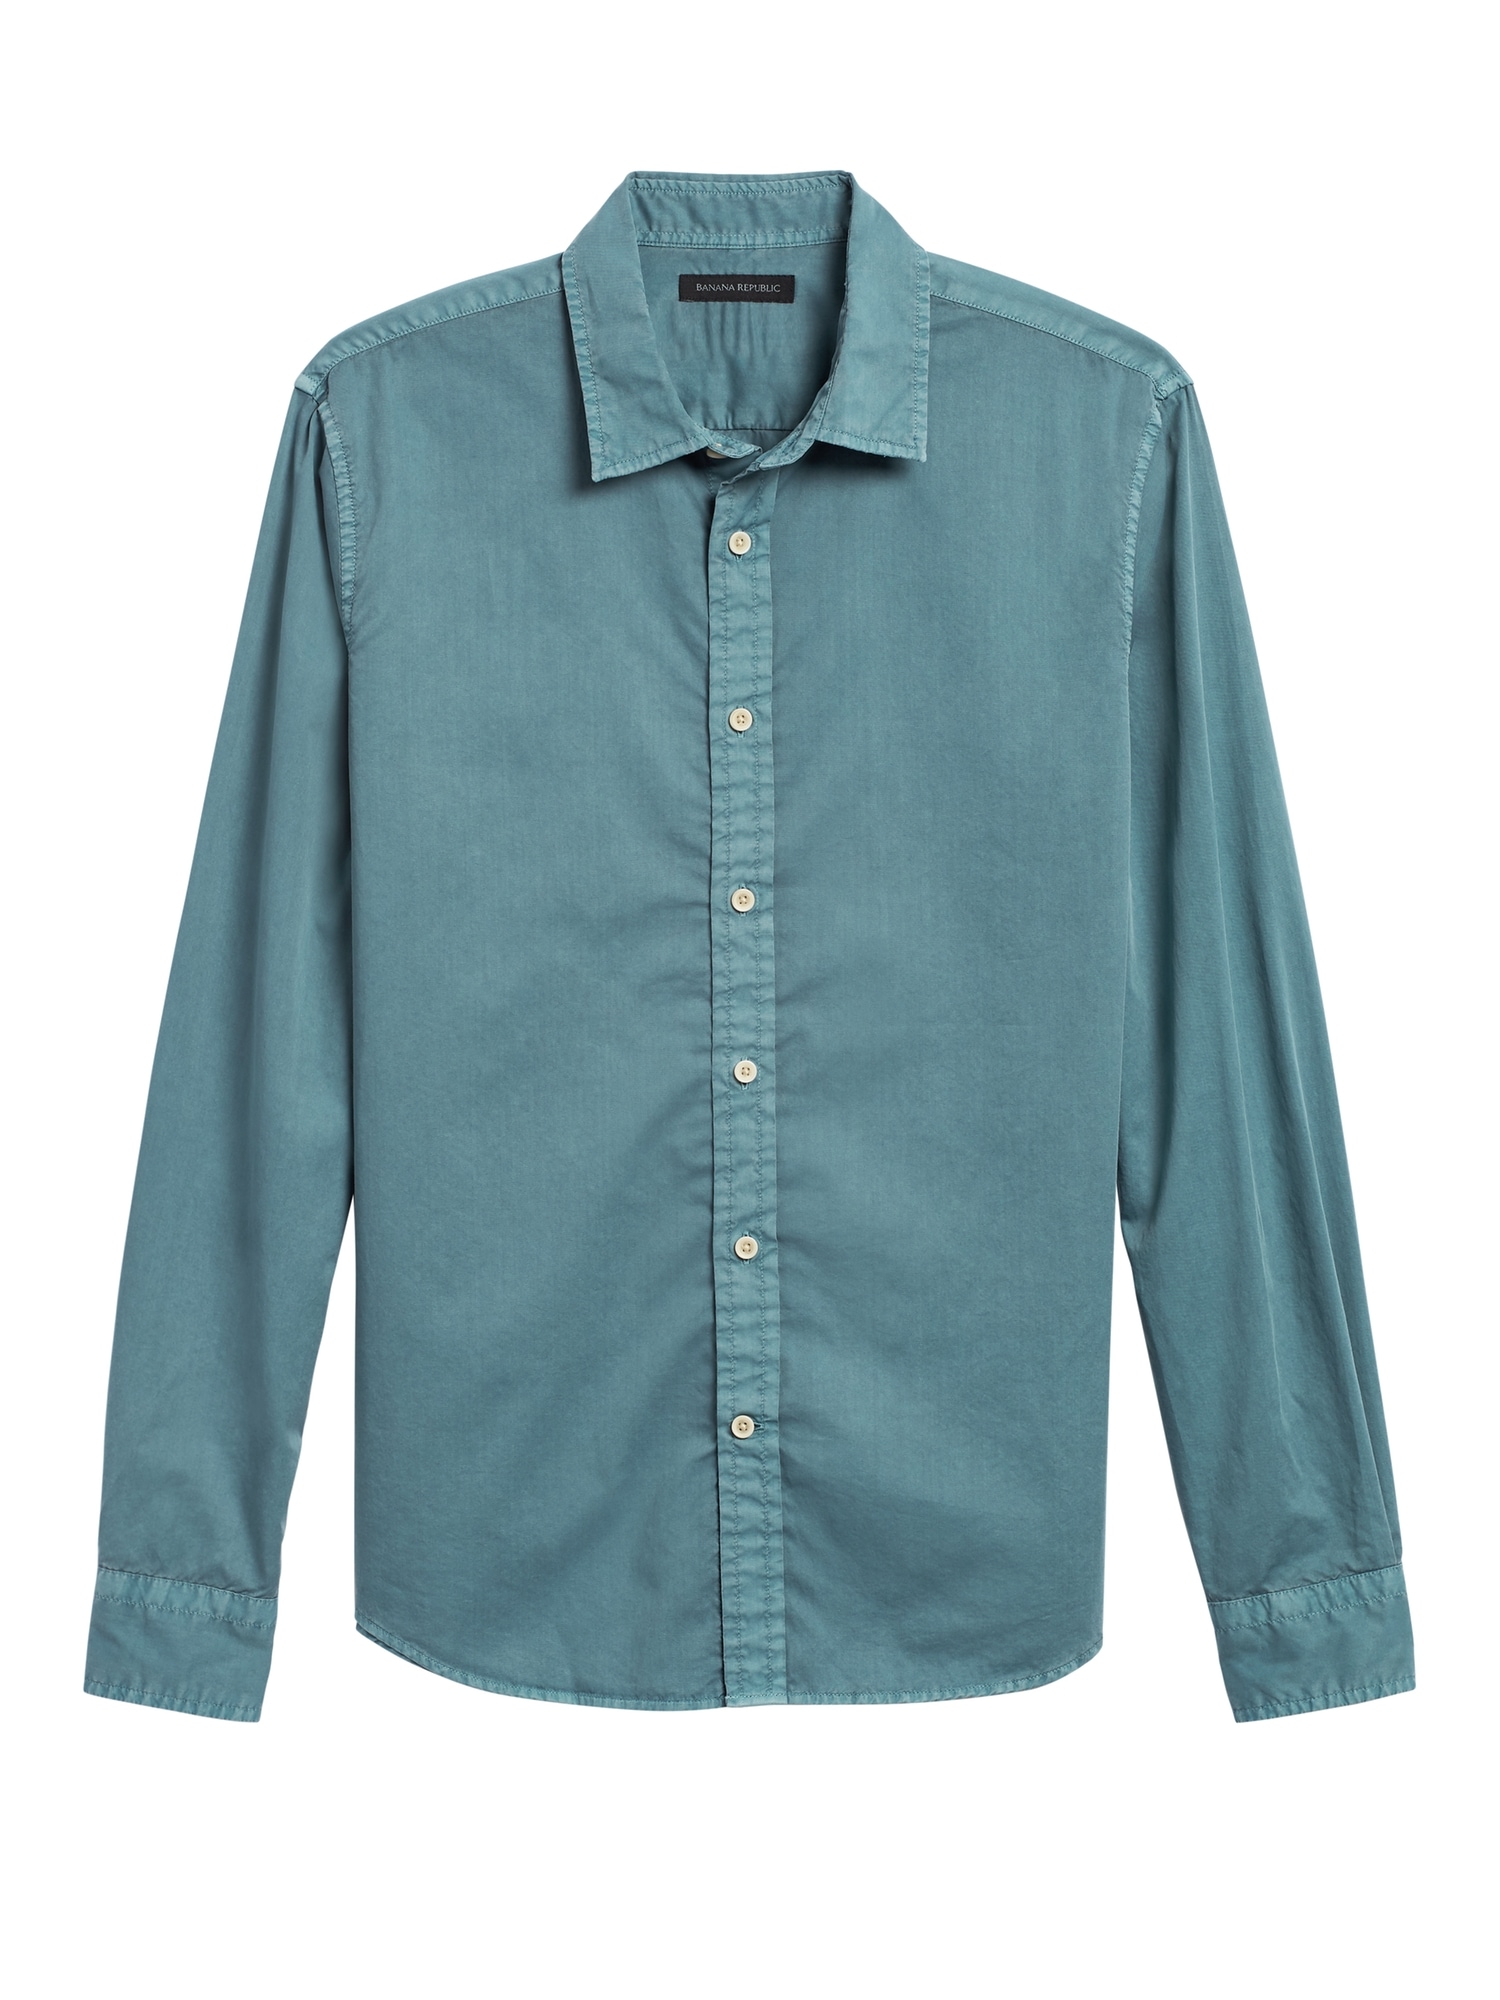 Untucked Standard-Fit Cotton Twill Shirt